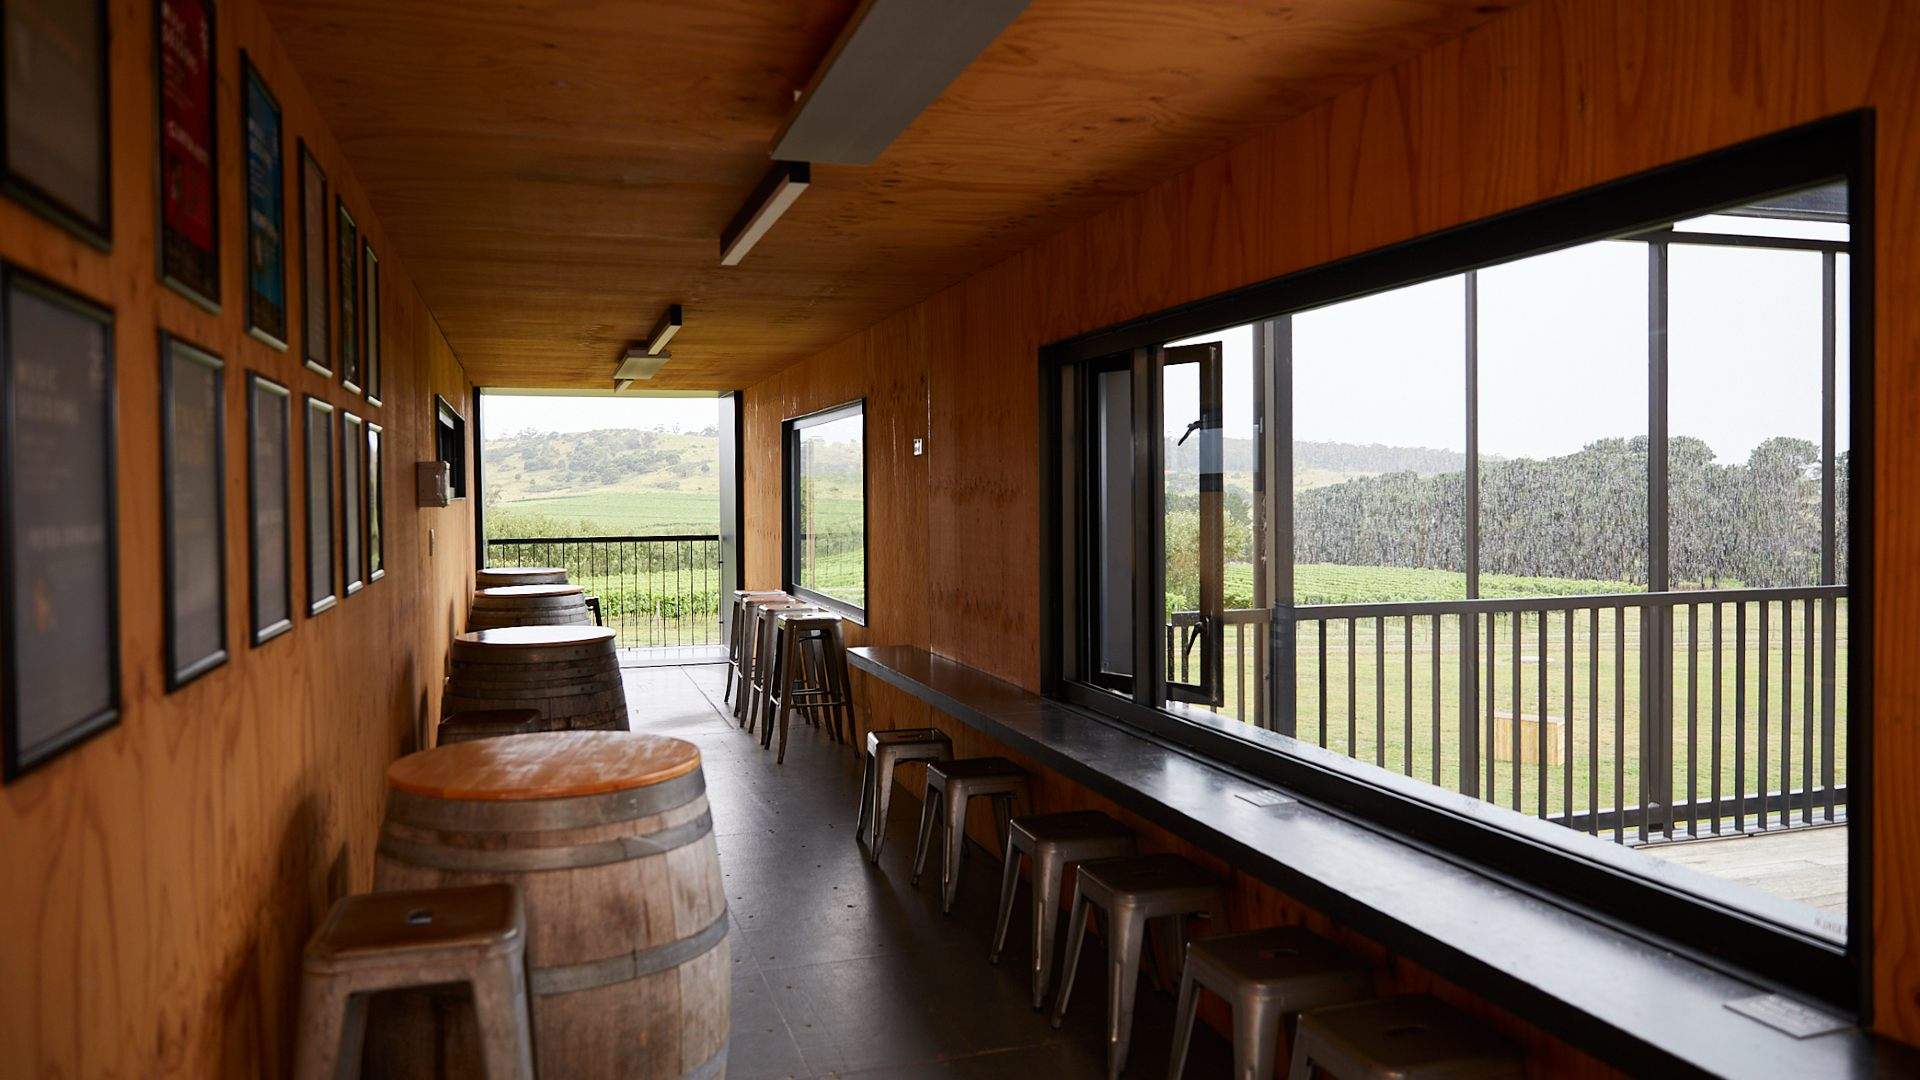 Famed Tassie Winery Devil's Corner Has Unveiled Its Ambitious Cellar Door Makeover